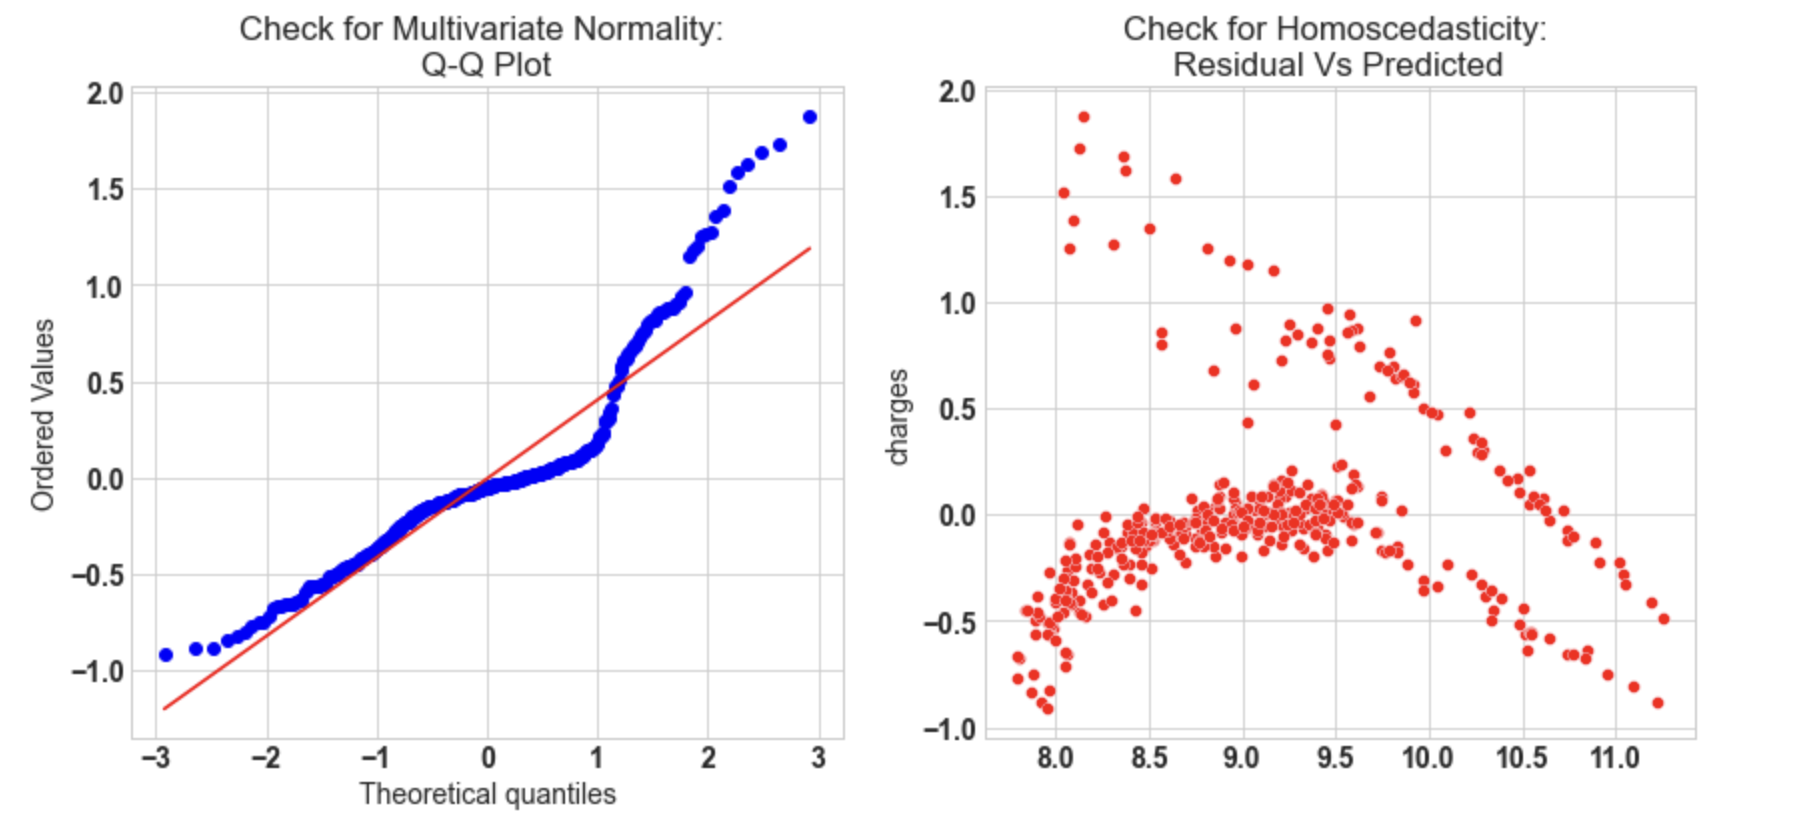 Check for Multivariate Normality